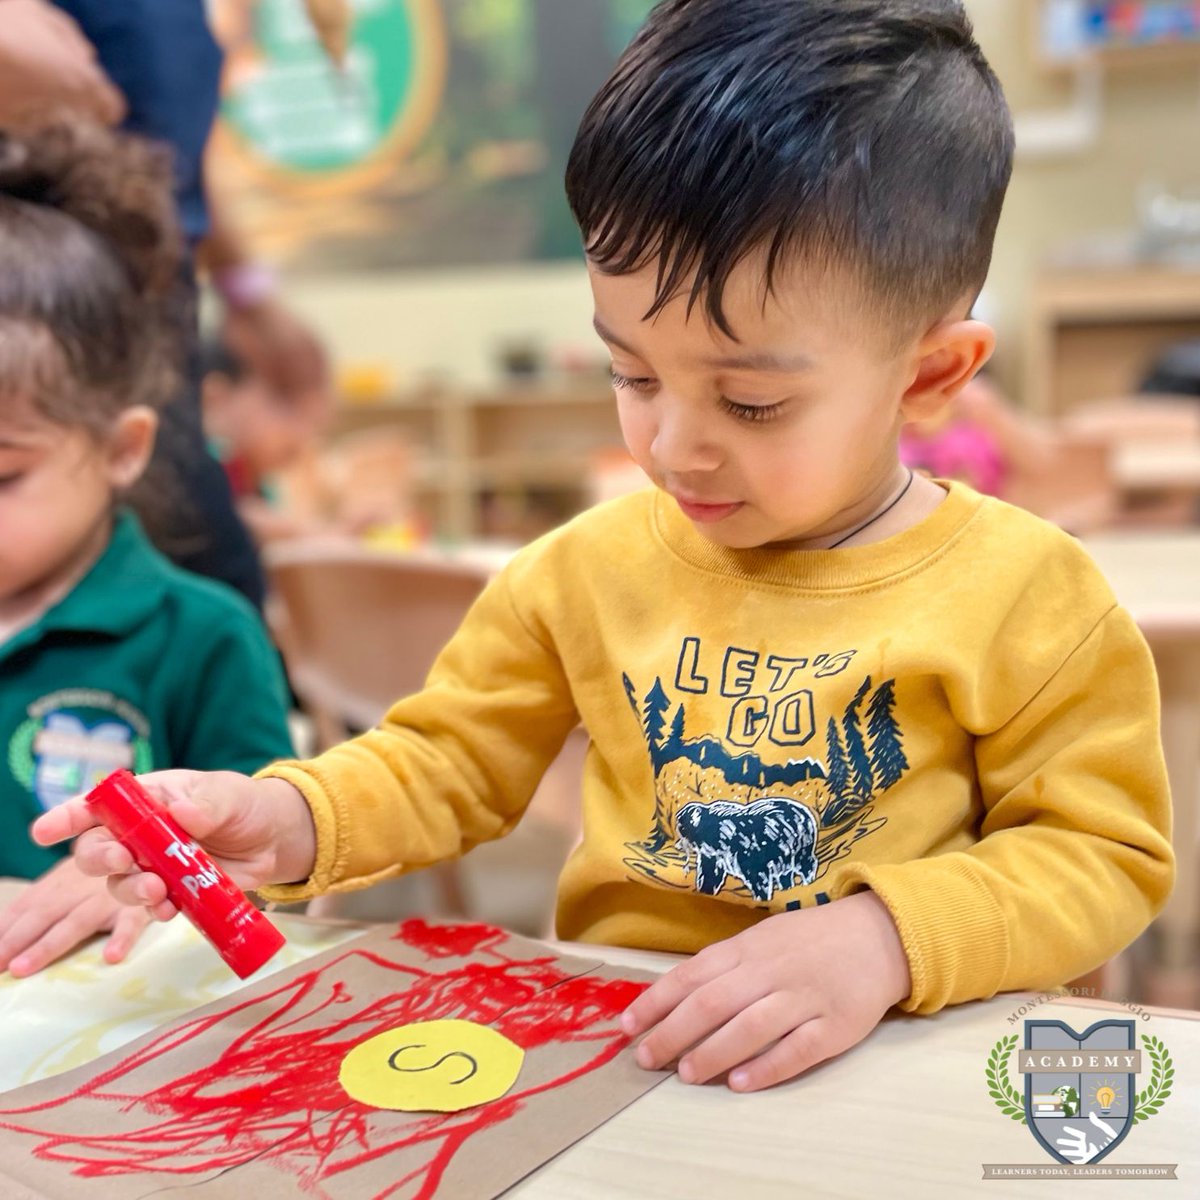 Our Pre-Primary students crafted their own superhero puppets using brown paper bags. They decorated these puppets and even bestowed upon them the 'super seal' to grant them their incredible powers.

#SugarLandPrivateEducation #ReggioEmilia #EarlyChildhoodEducation